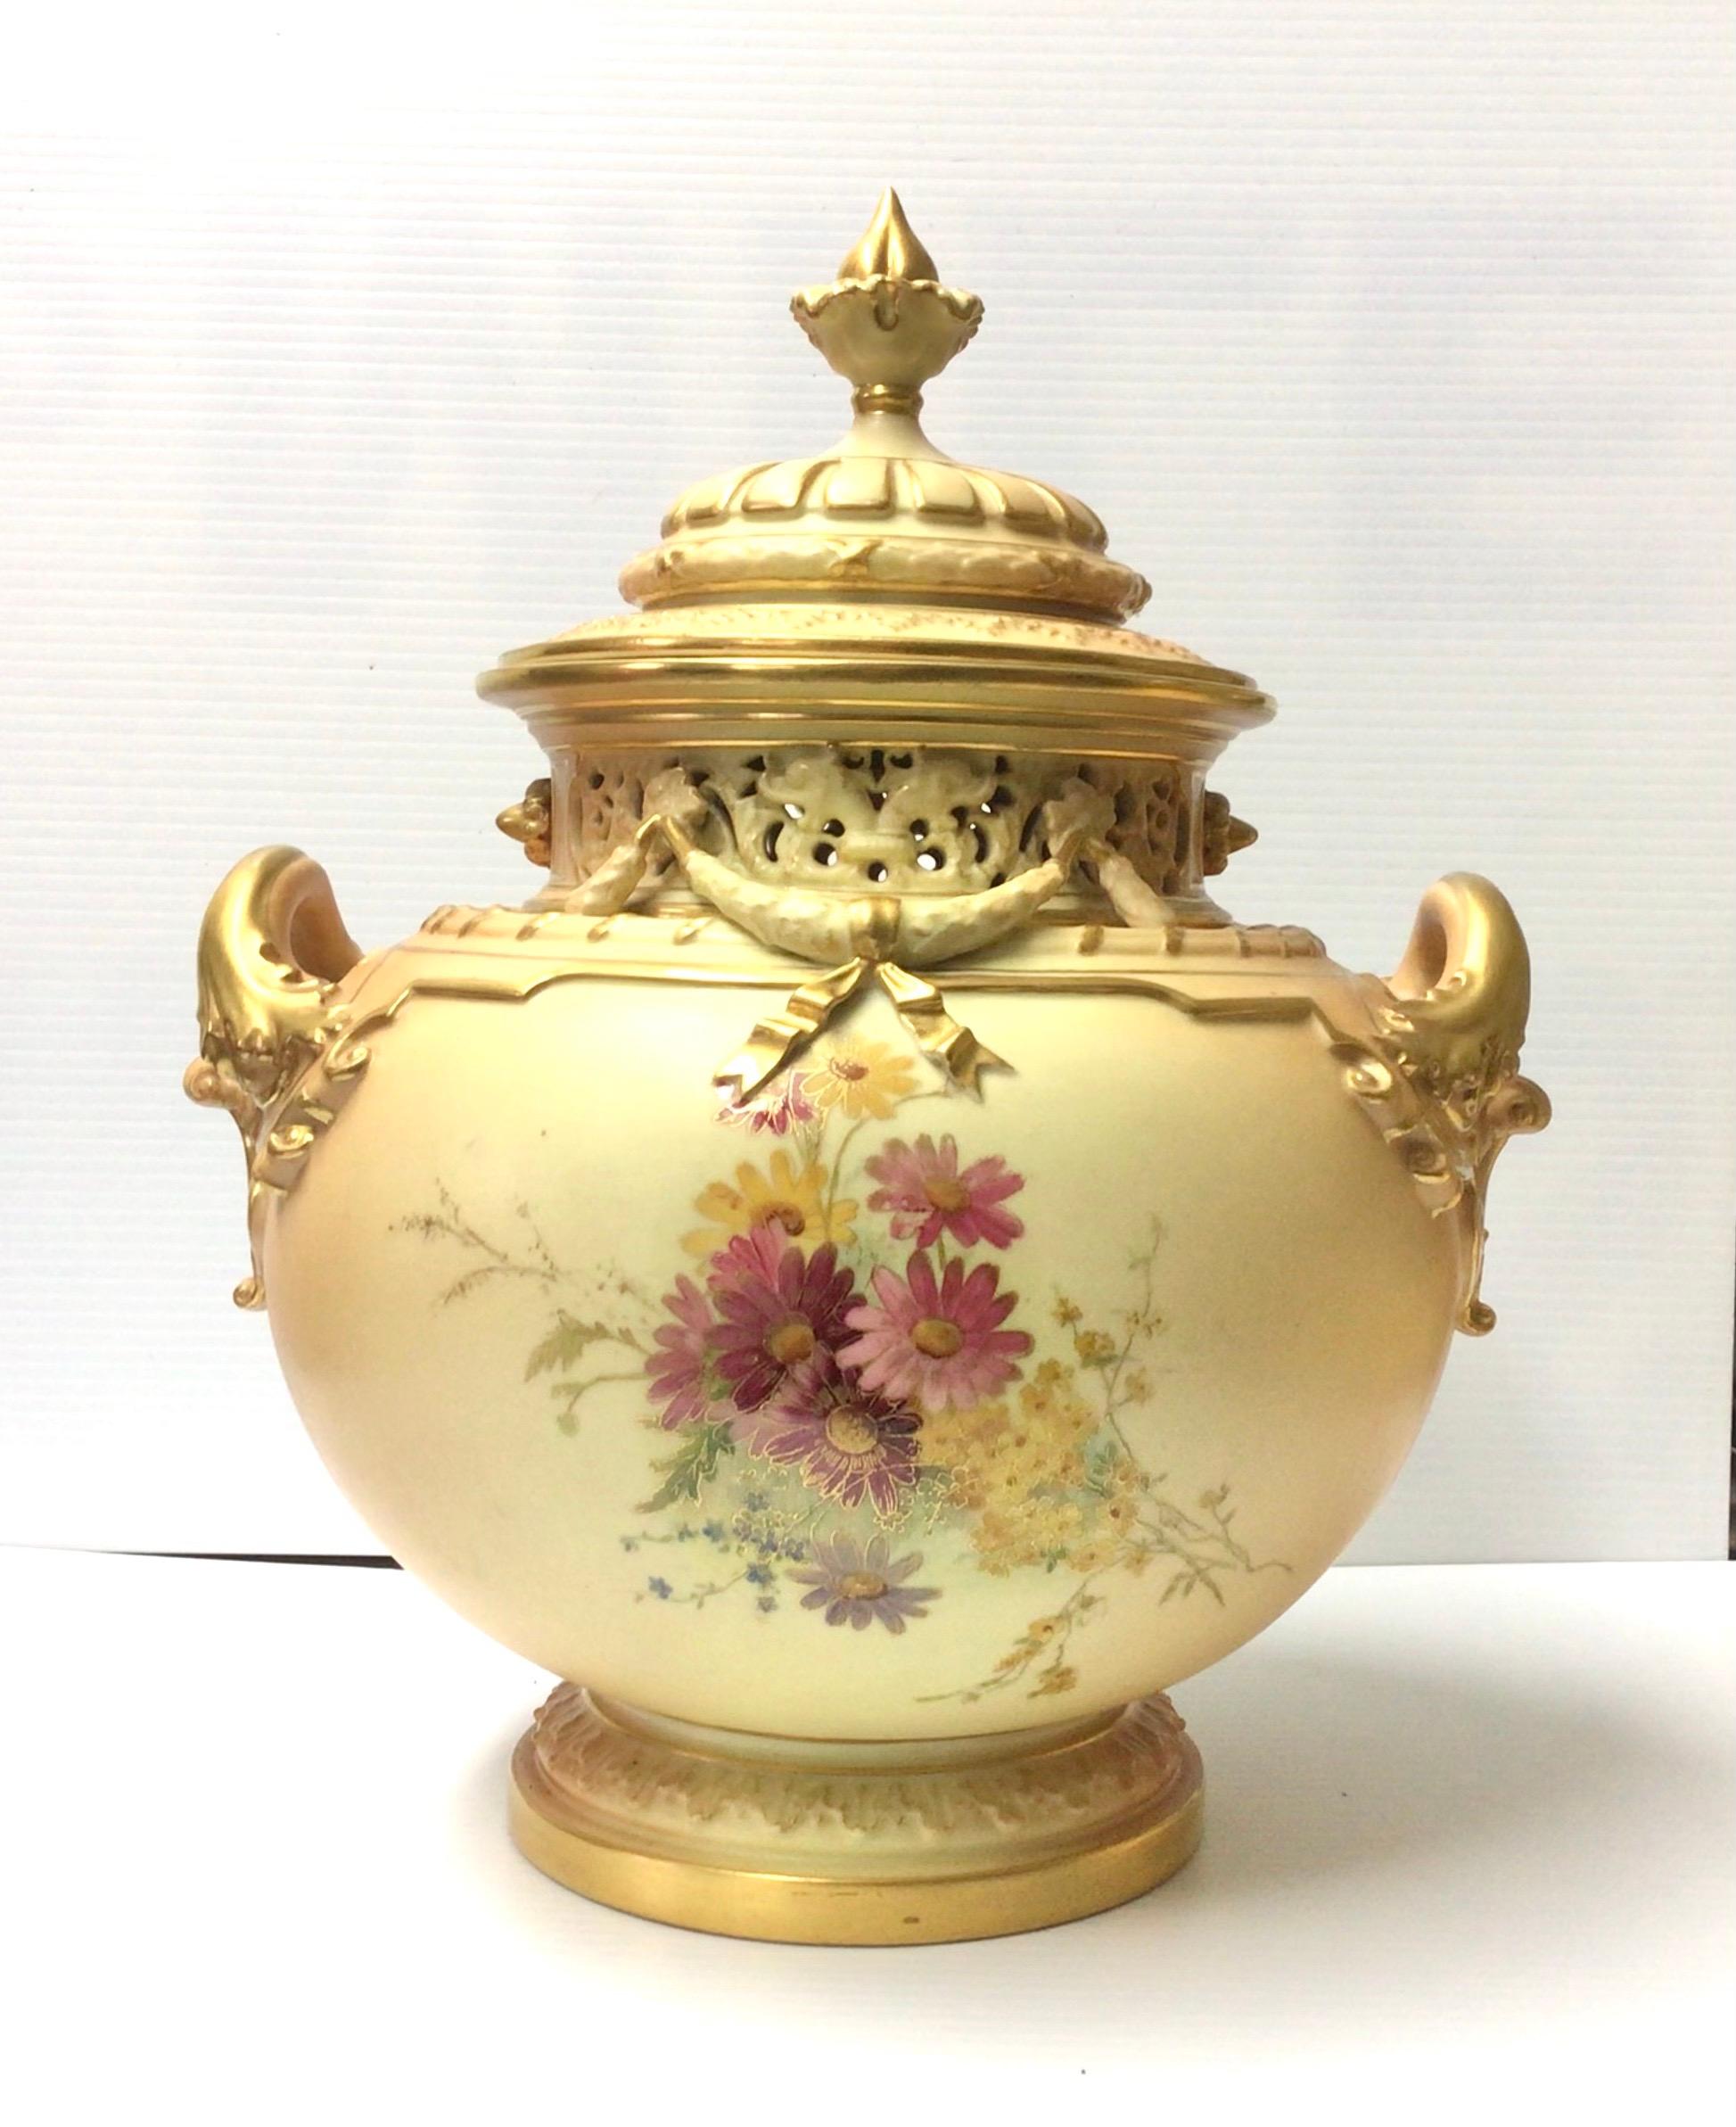 Magnificent large Royal Worcester antique blush ivory bow urn vase complete with original cover,beautifully painted with flowers and foliage.
Measures: 14ins tall x 11ins diameter
Dated 1912.